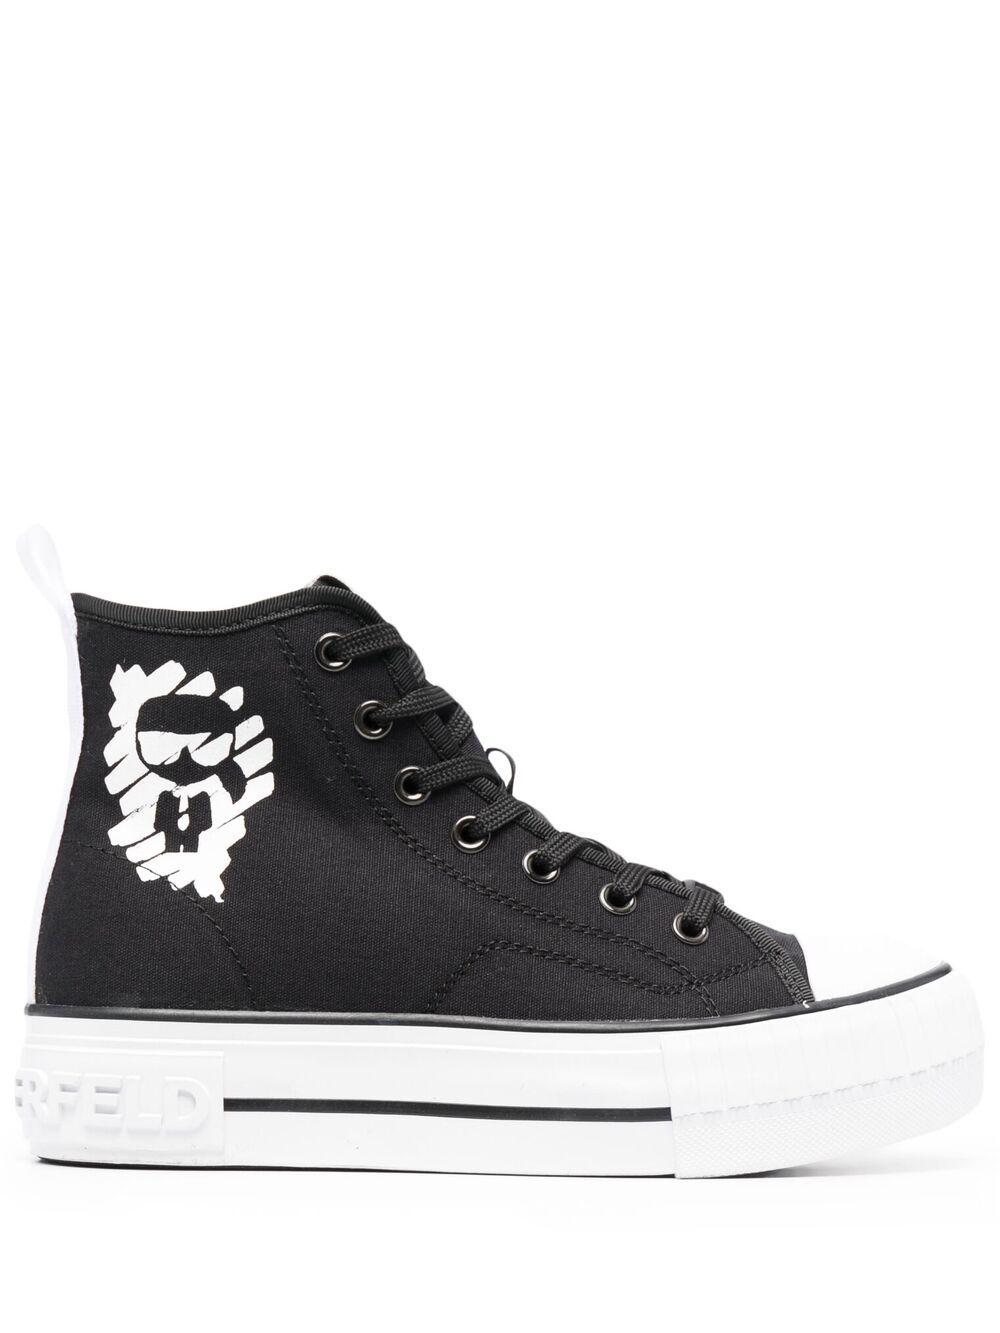 Karl Lagerfeld Cotton Platform Lace-up Hi-top Sneakers in Black | Lyst